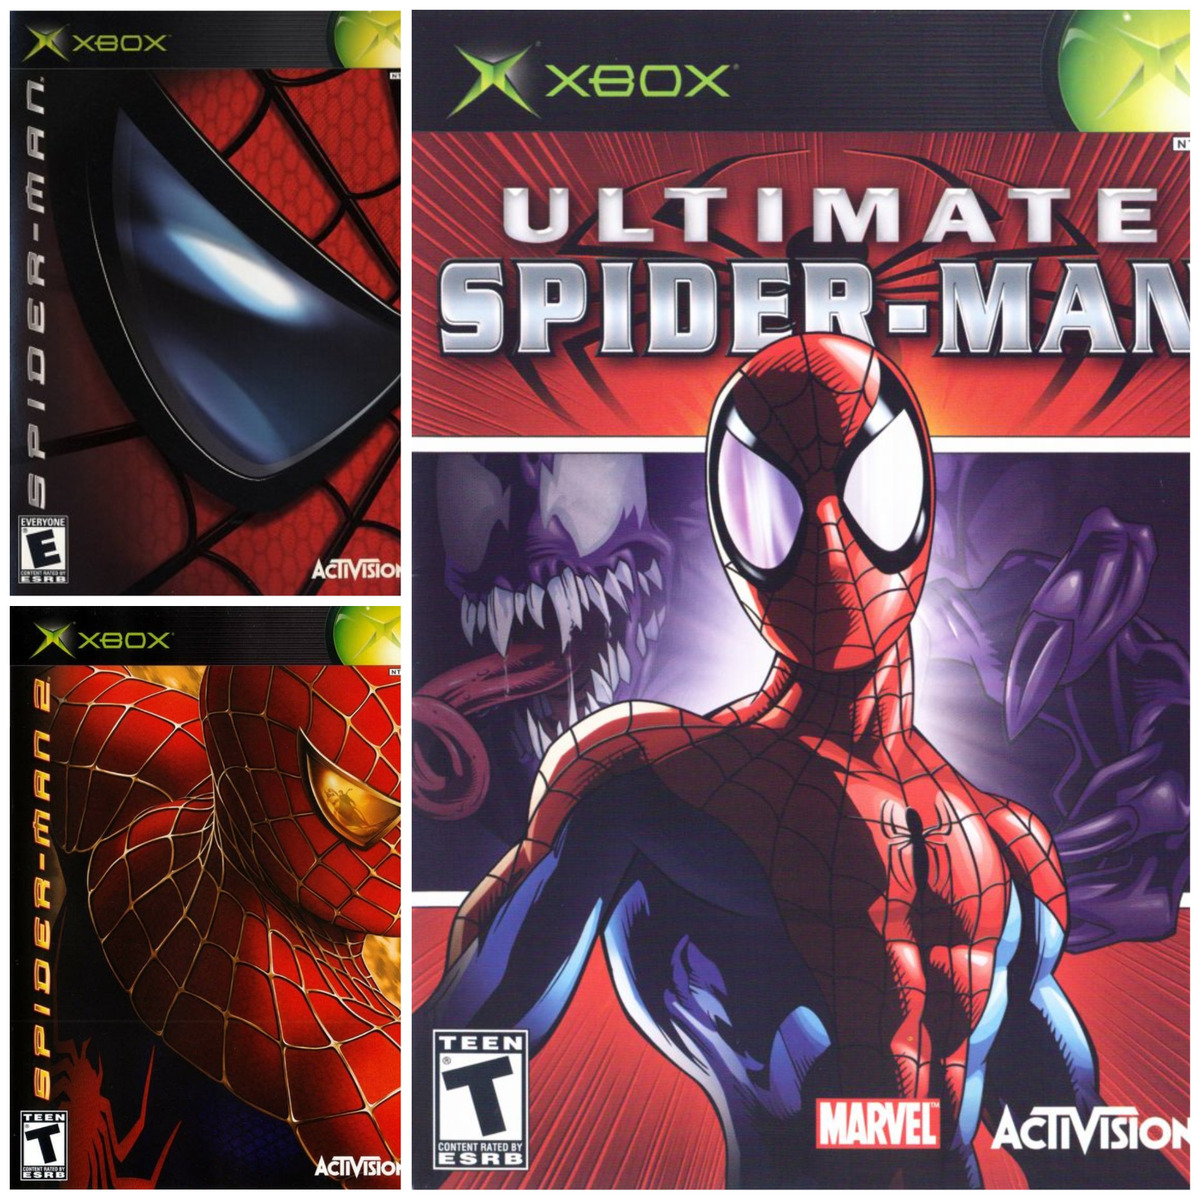 Spiderman Xbox Original Games - Choose Your Game - Complete Collection